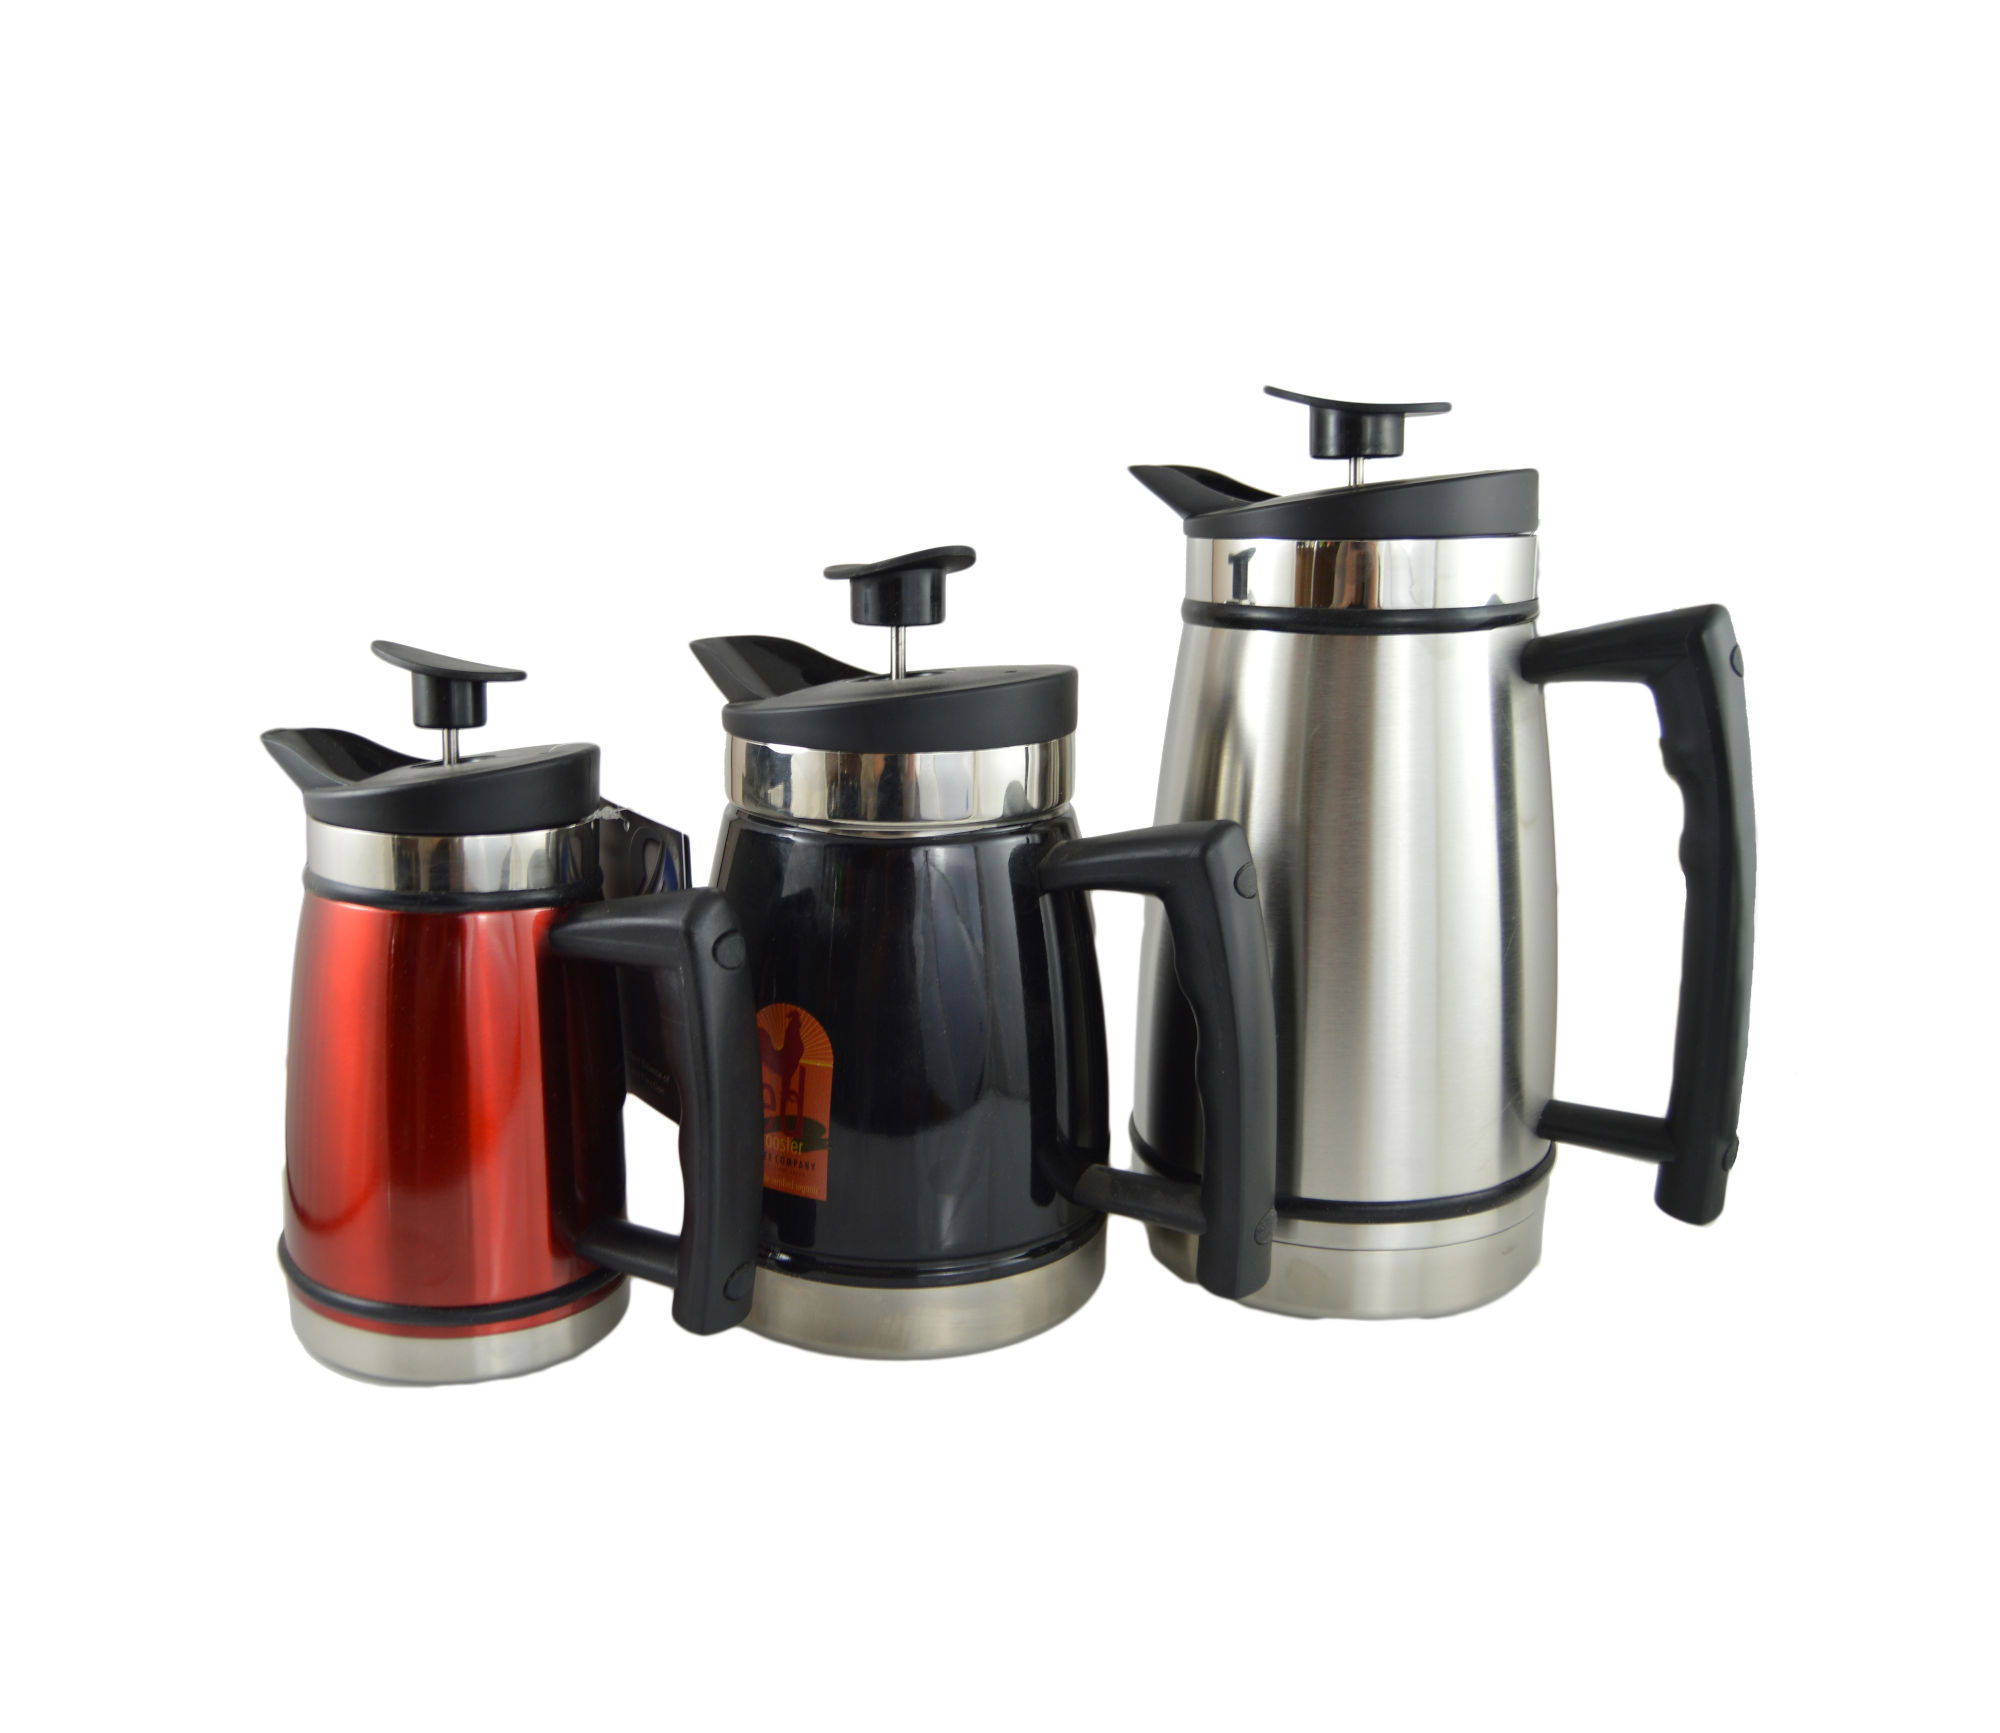 Brew Coffee at Home Bundle - Planetary Design